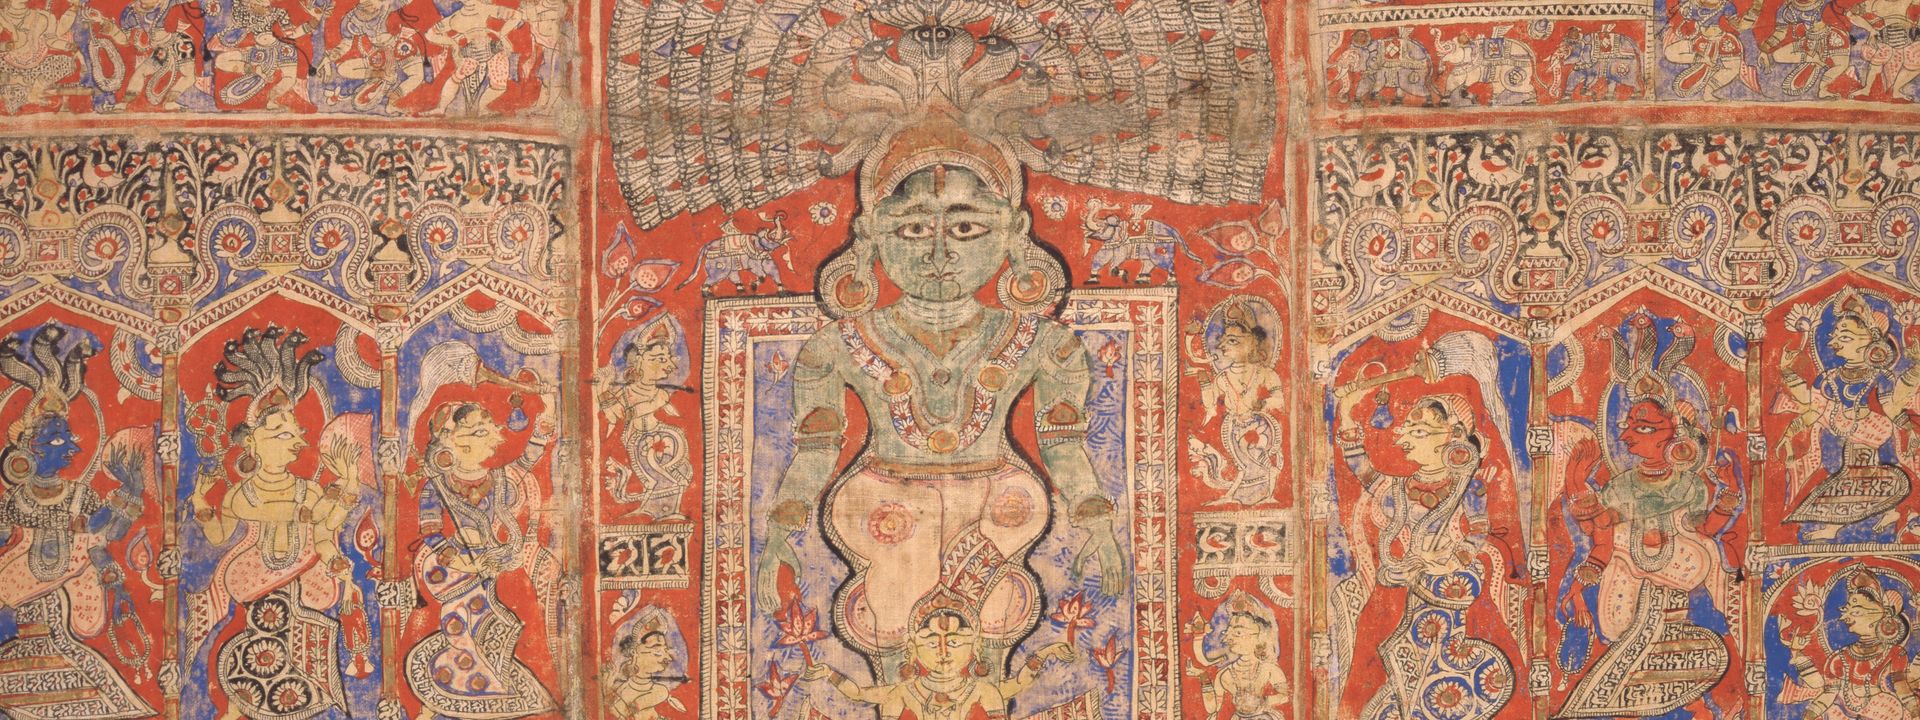 Scenes from the Life of the Jina Parshvanatha, c. 1450–75, Indian